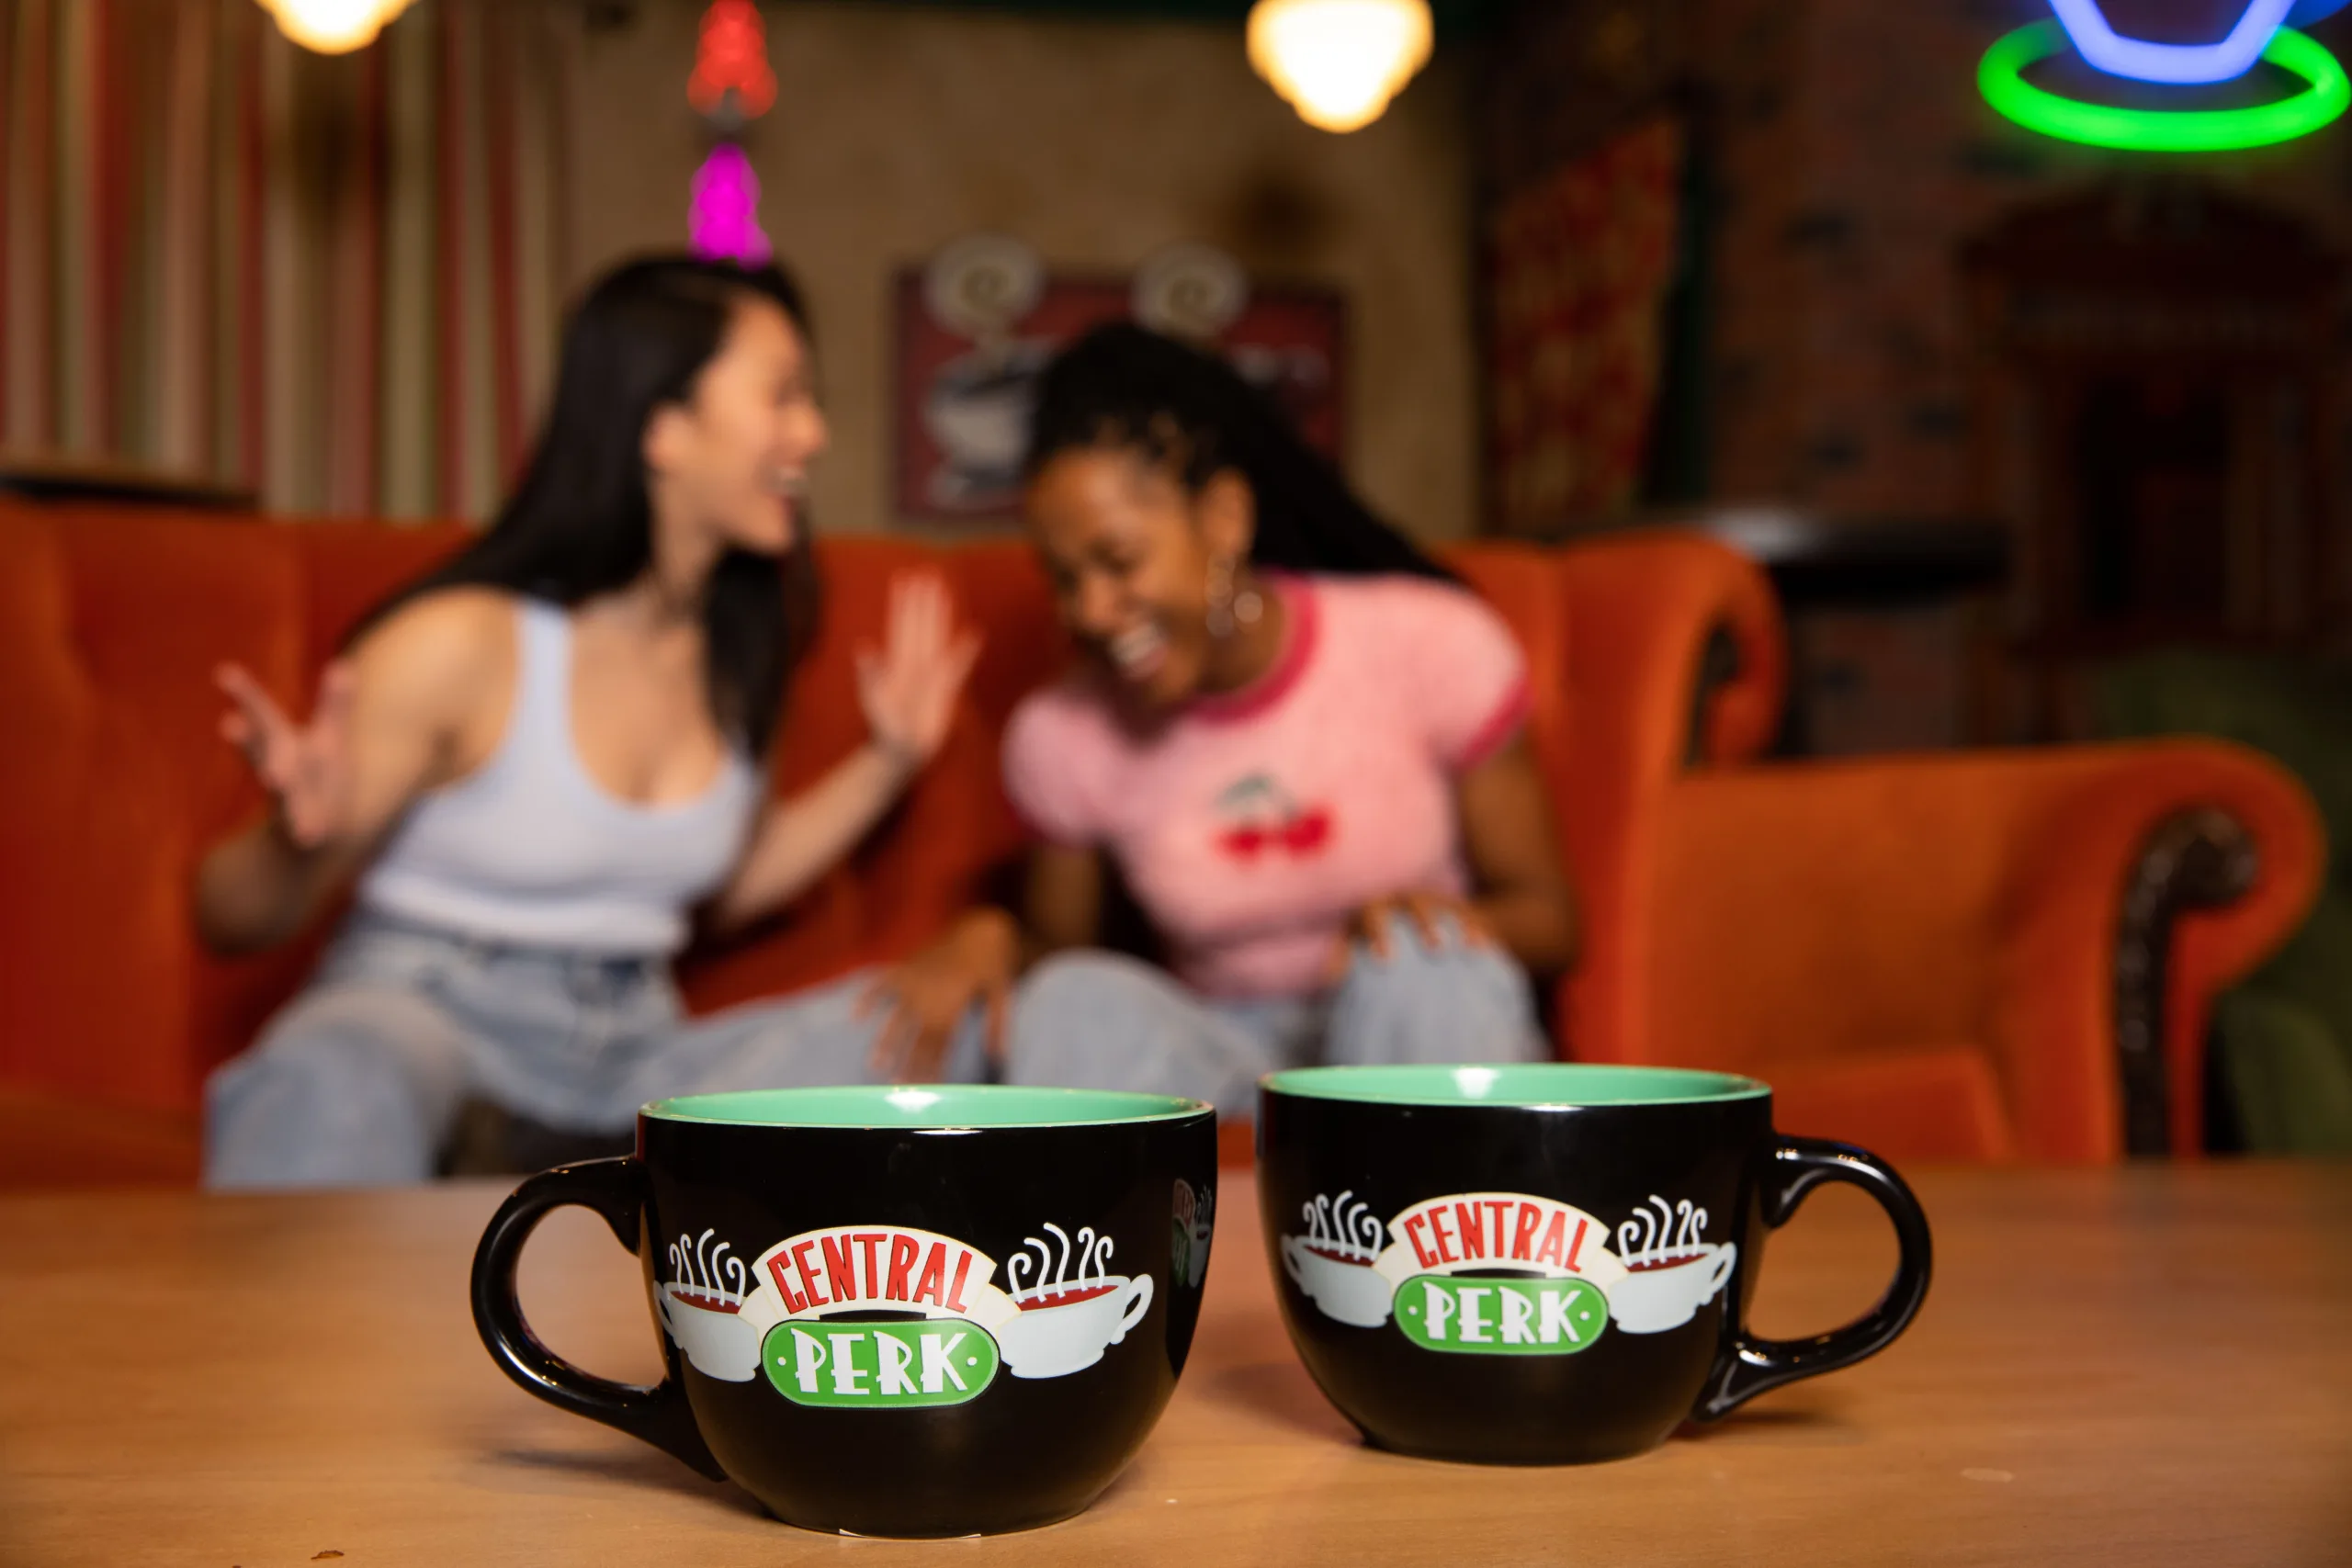 The Friends Experience Official Store Central Perk Mug – Friends